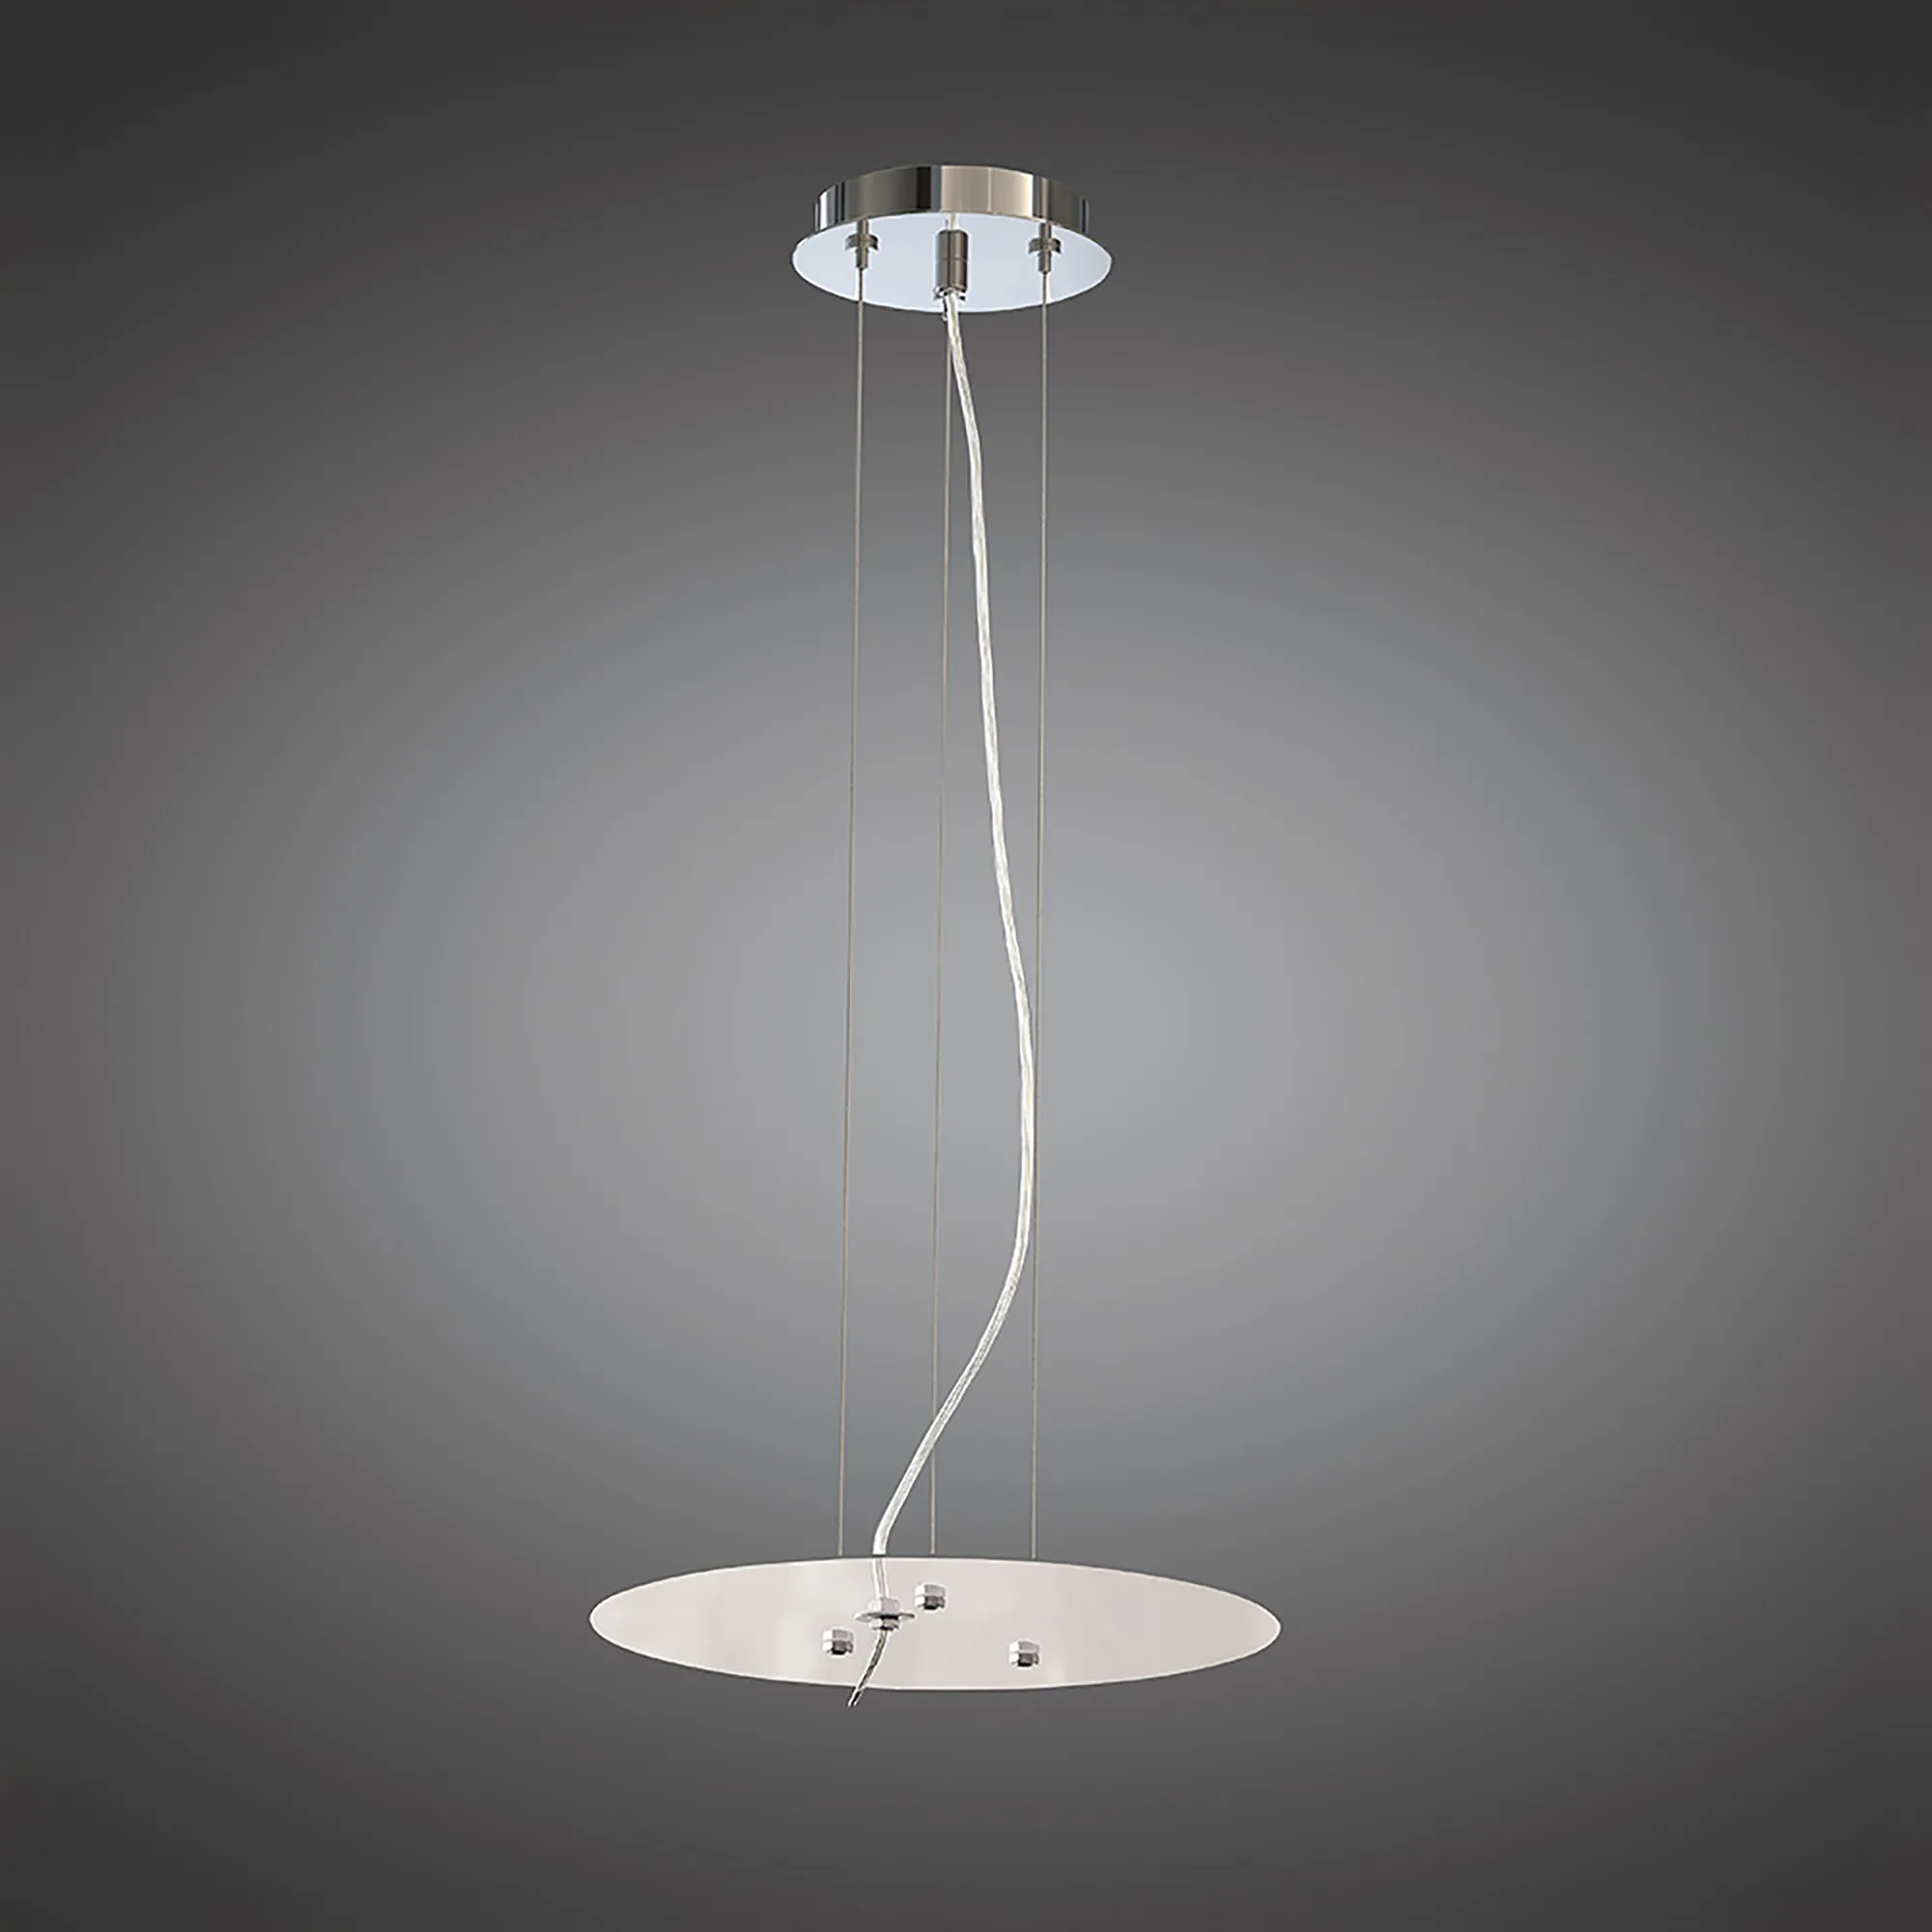 Sabina Ceiling Lights Mantra Ceiling Accessories